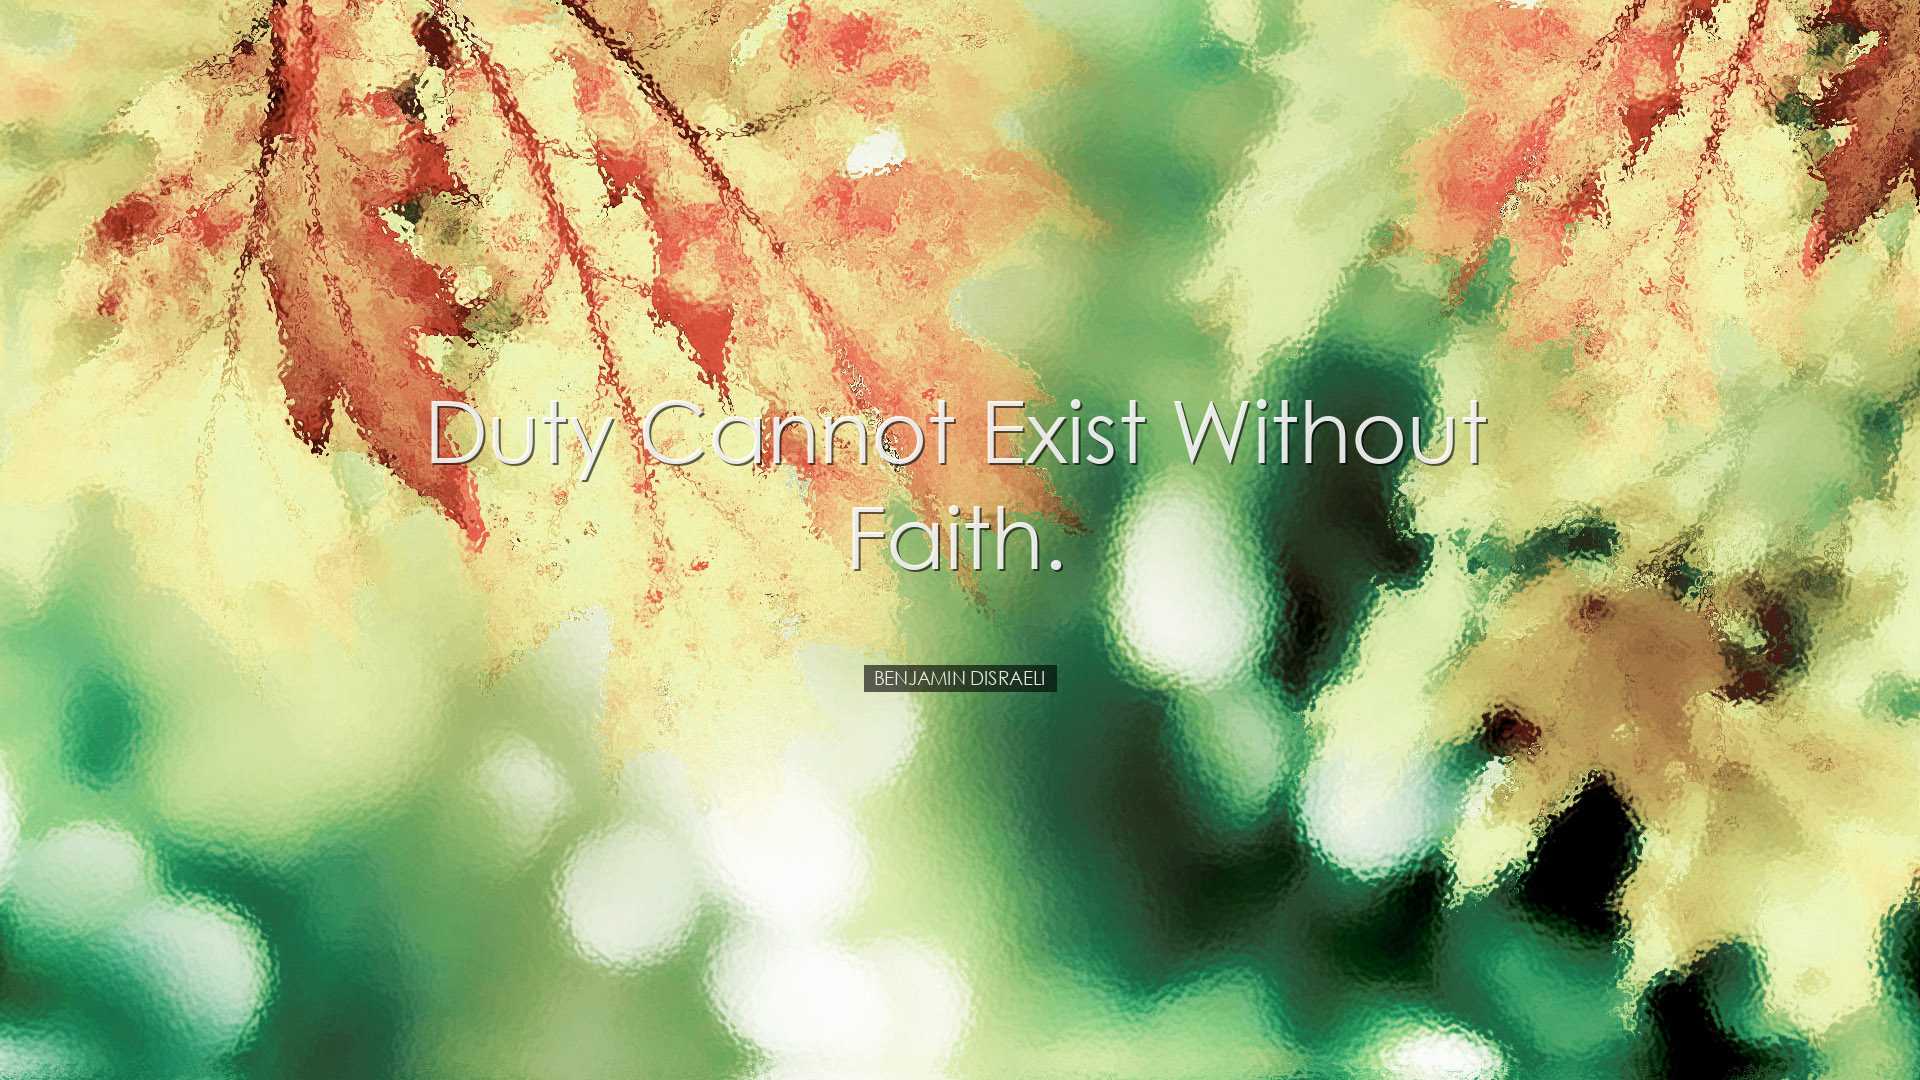 Duty cannot exist without faith. - Benjamin Disraeli